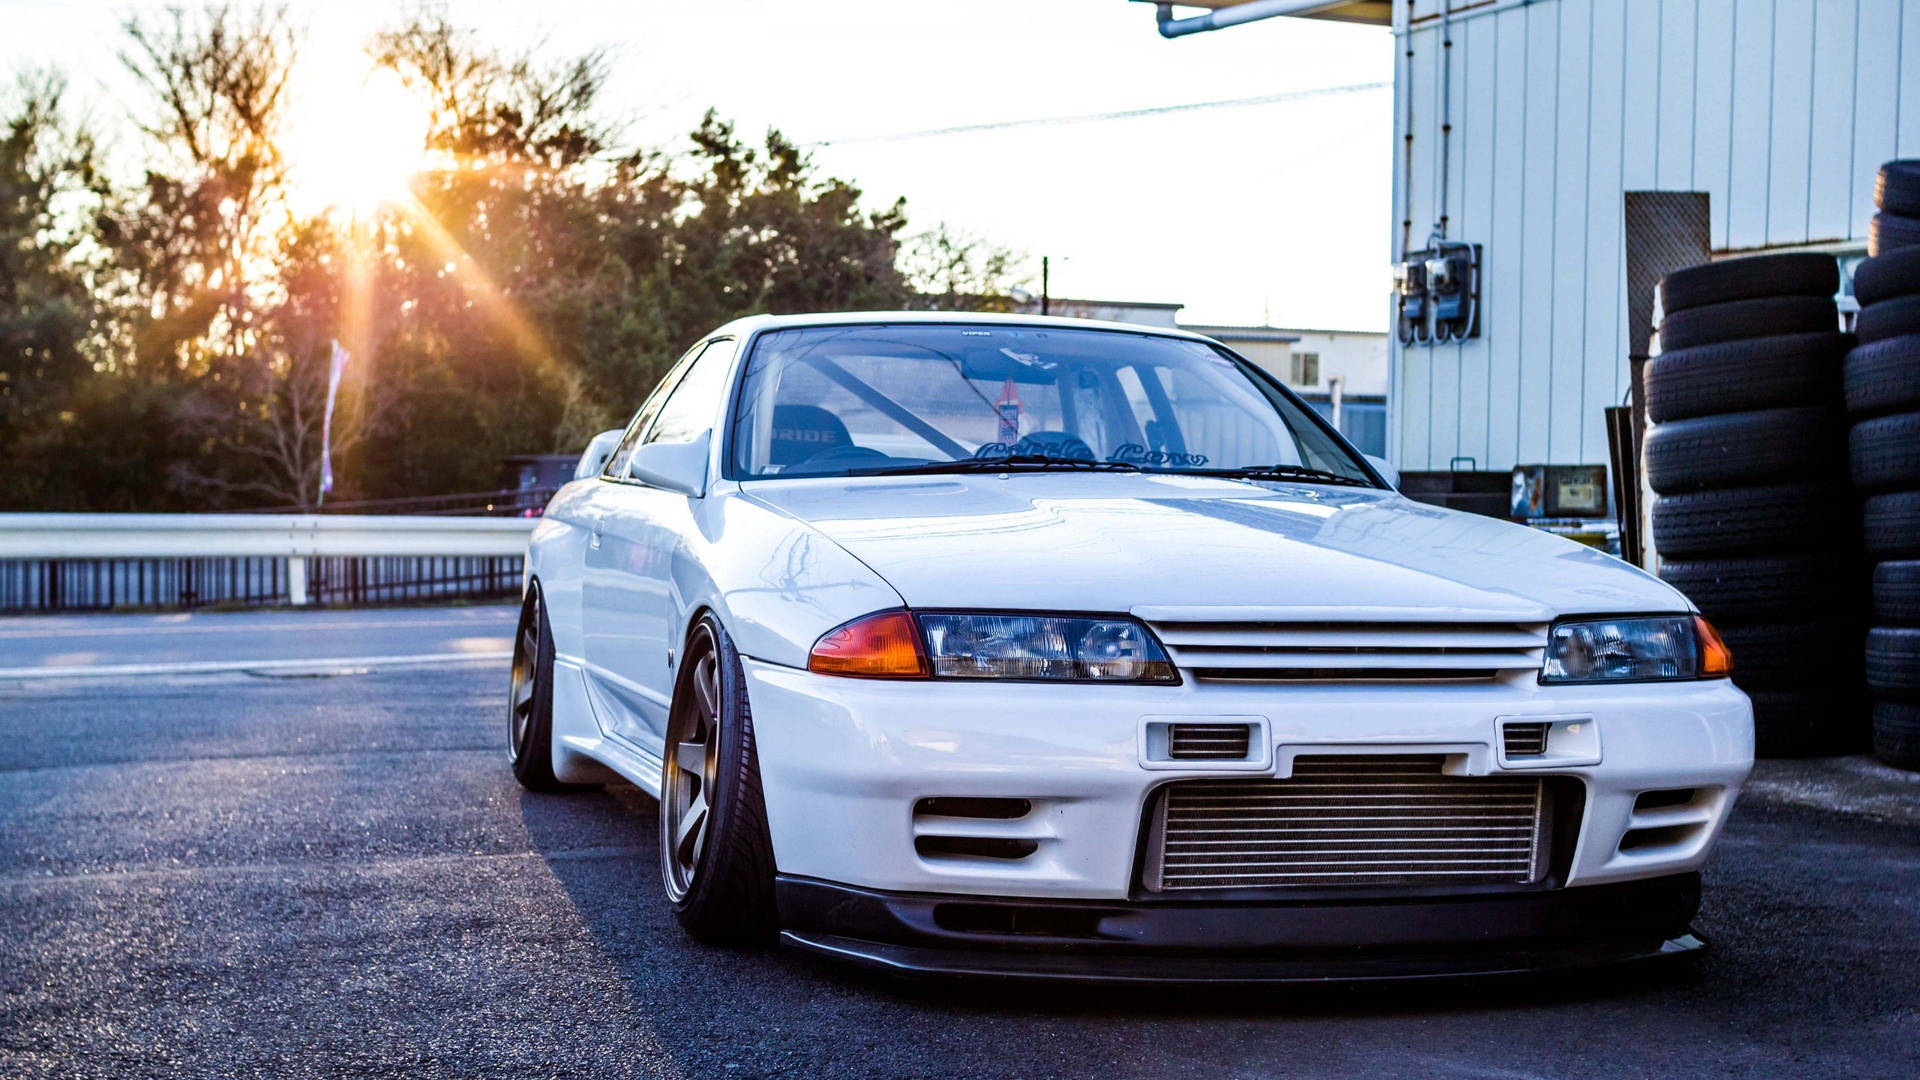 White JDM Car With Sunset Rays Wallpaper